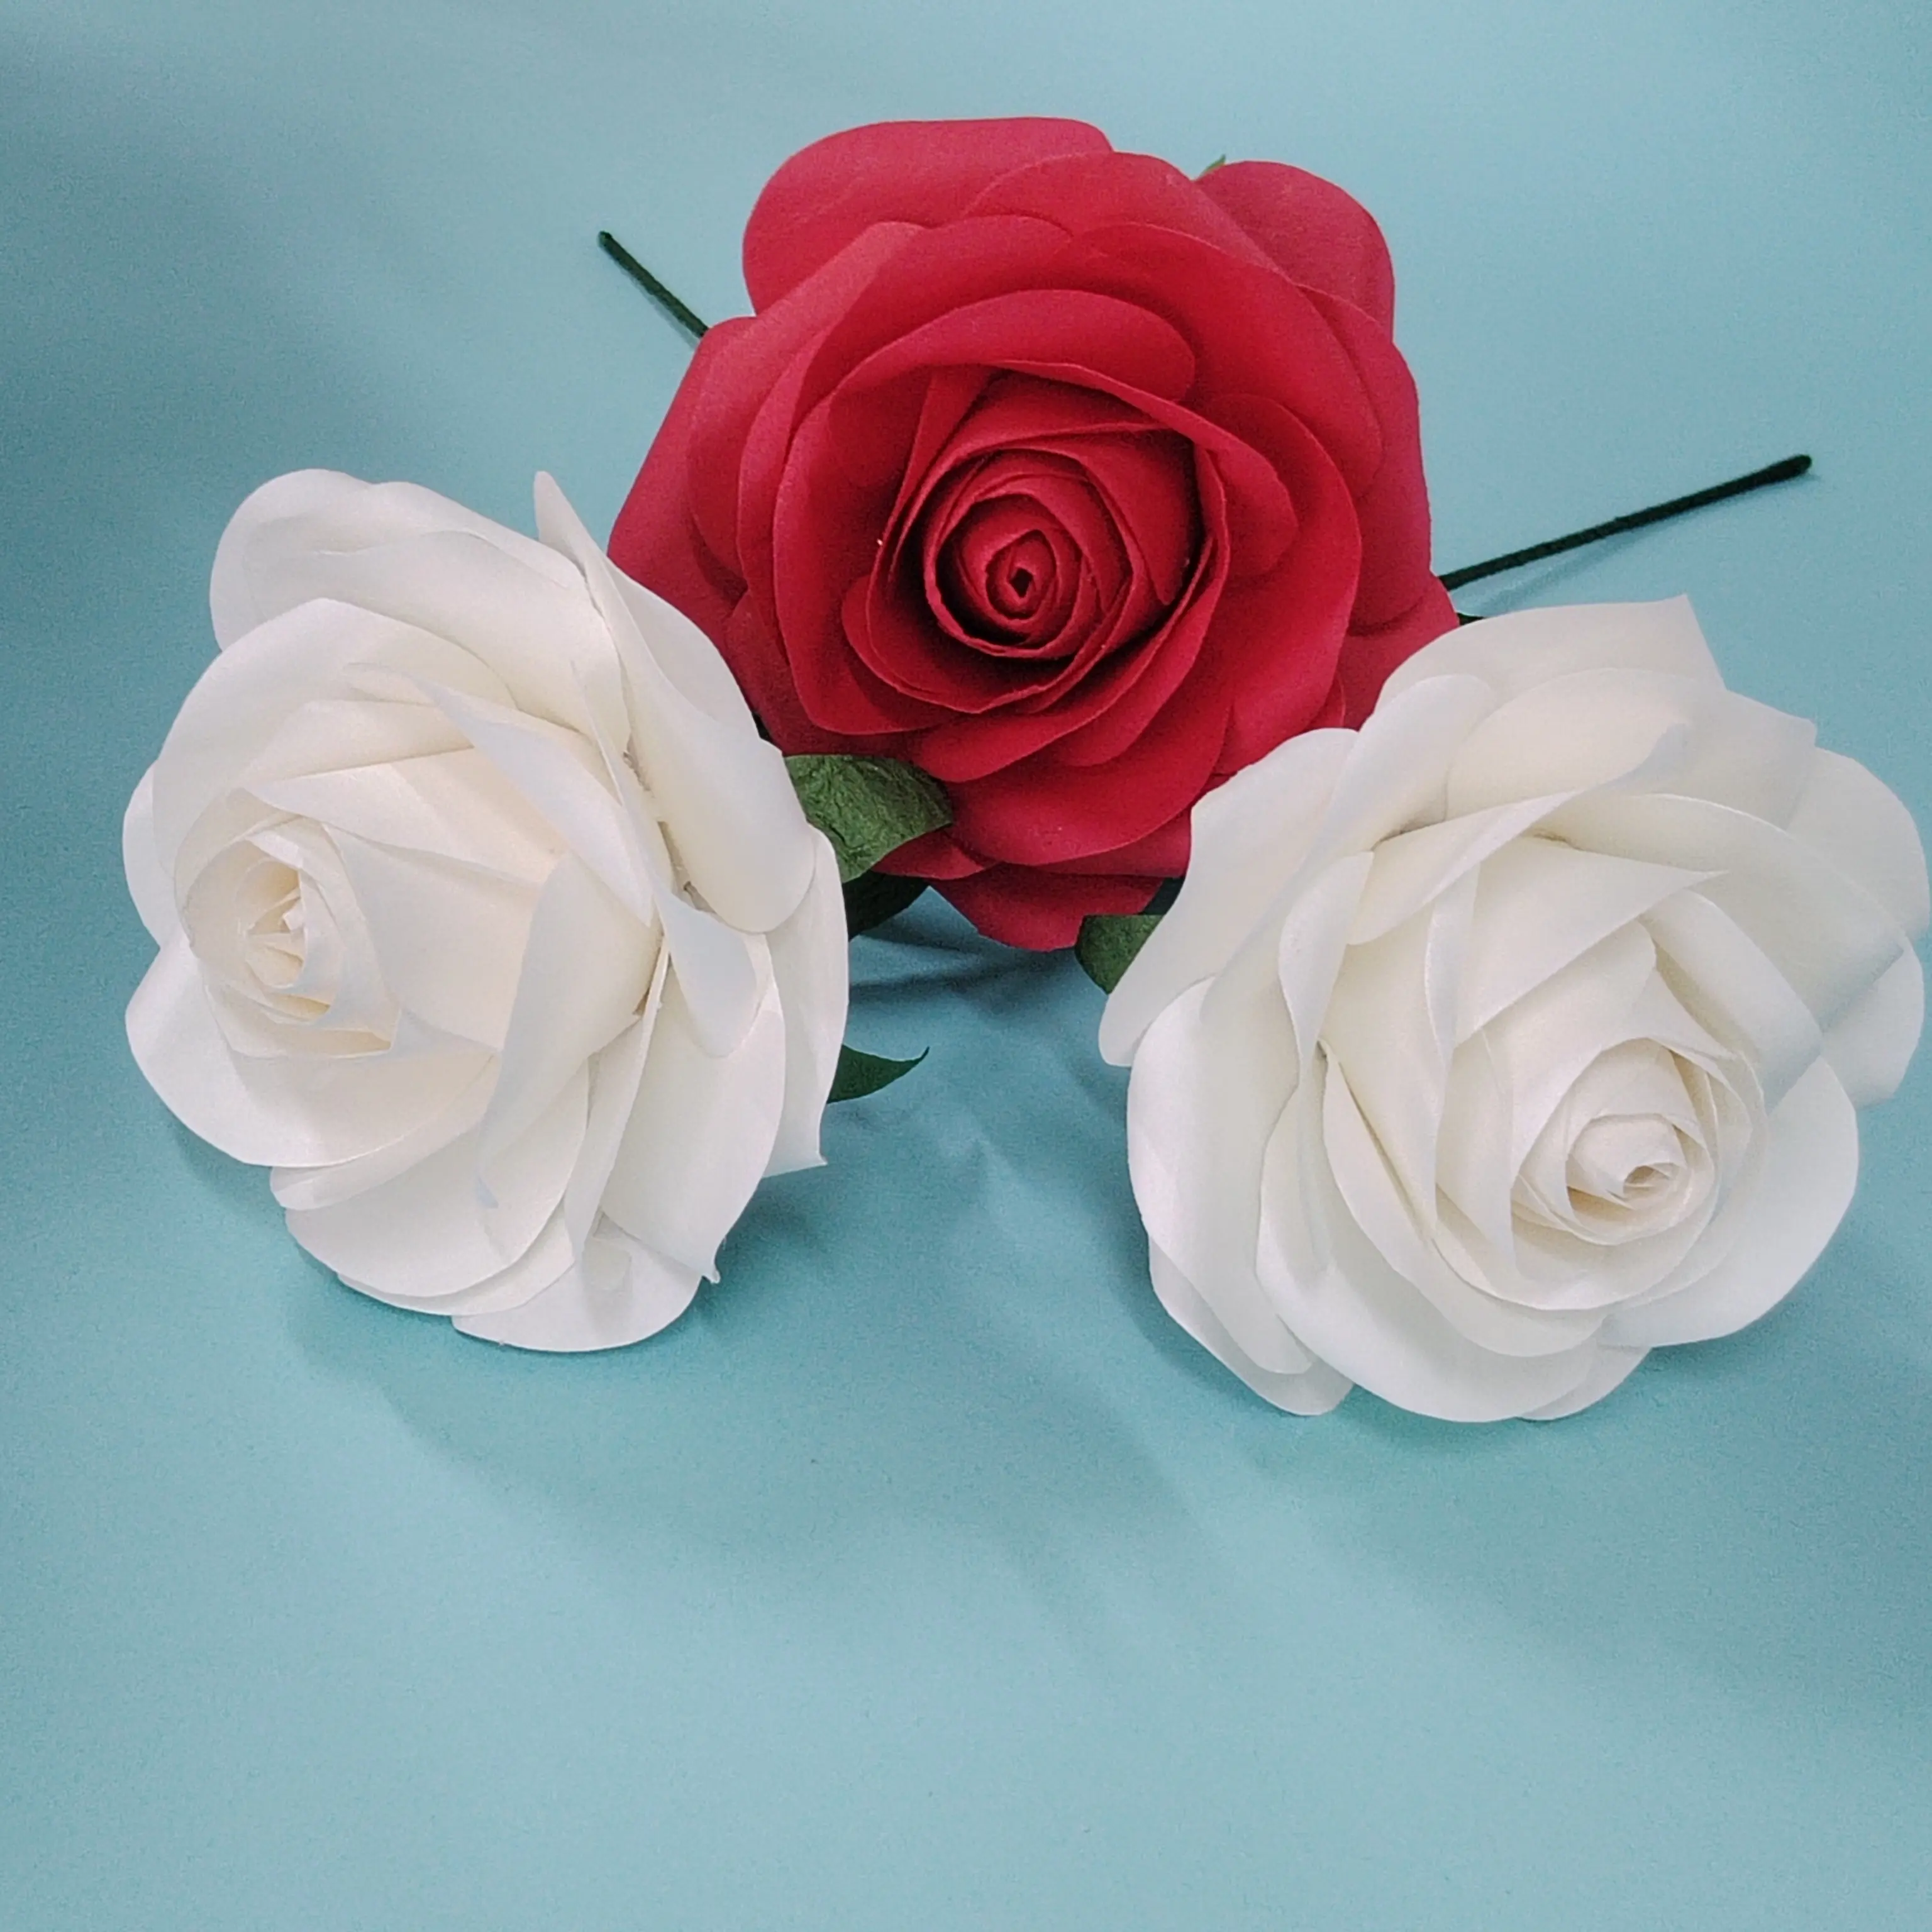 China Factory Good Quality cheap paper flower Real Touch Rose head Red rose wedding decoration wholesale paper flower